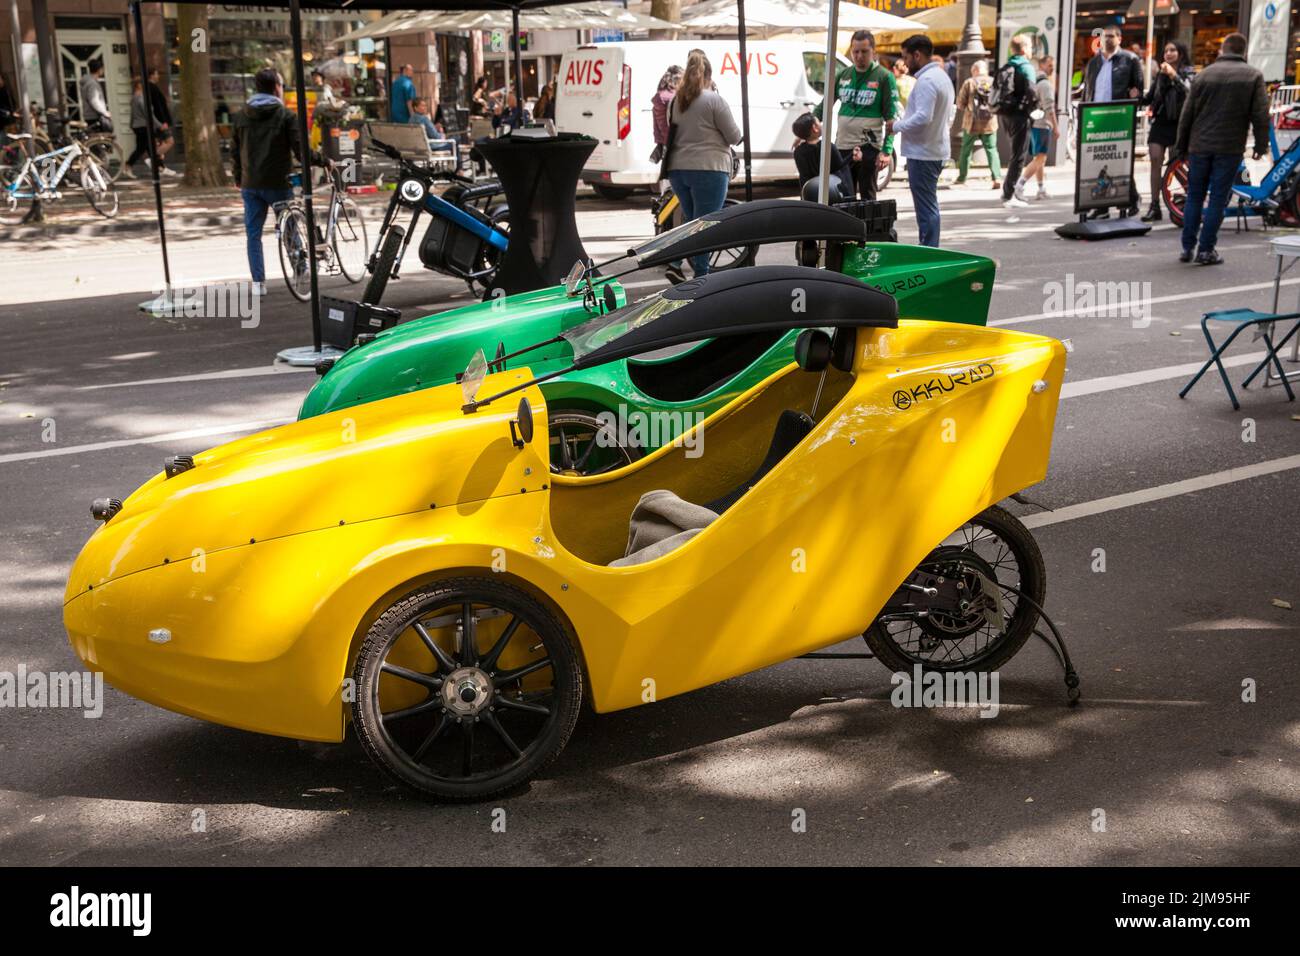 at the polisMobility Moving Cities fair exhibitors present different mobility concepts for the future, Cologne, Germany. Velomobile of the company Akk Stock Photo